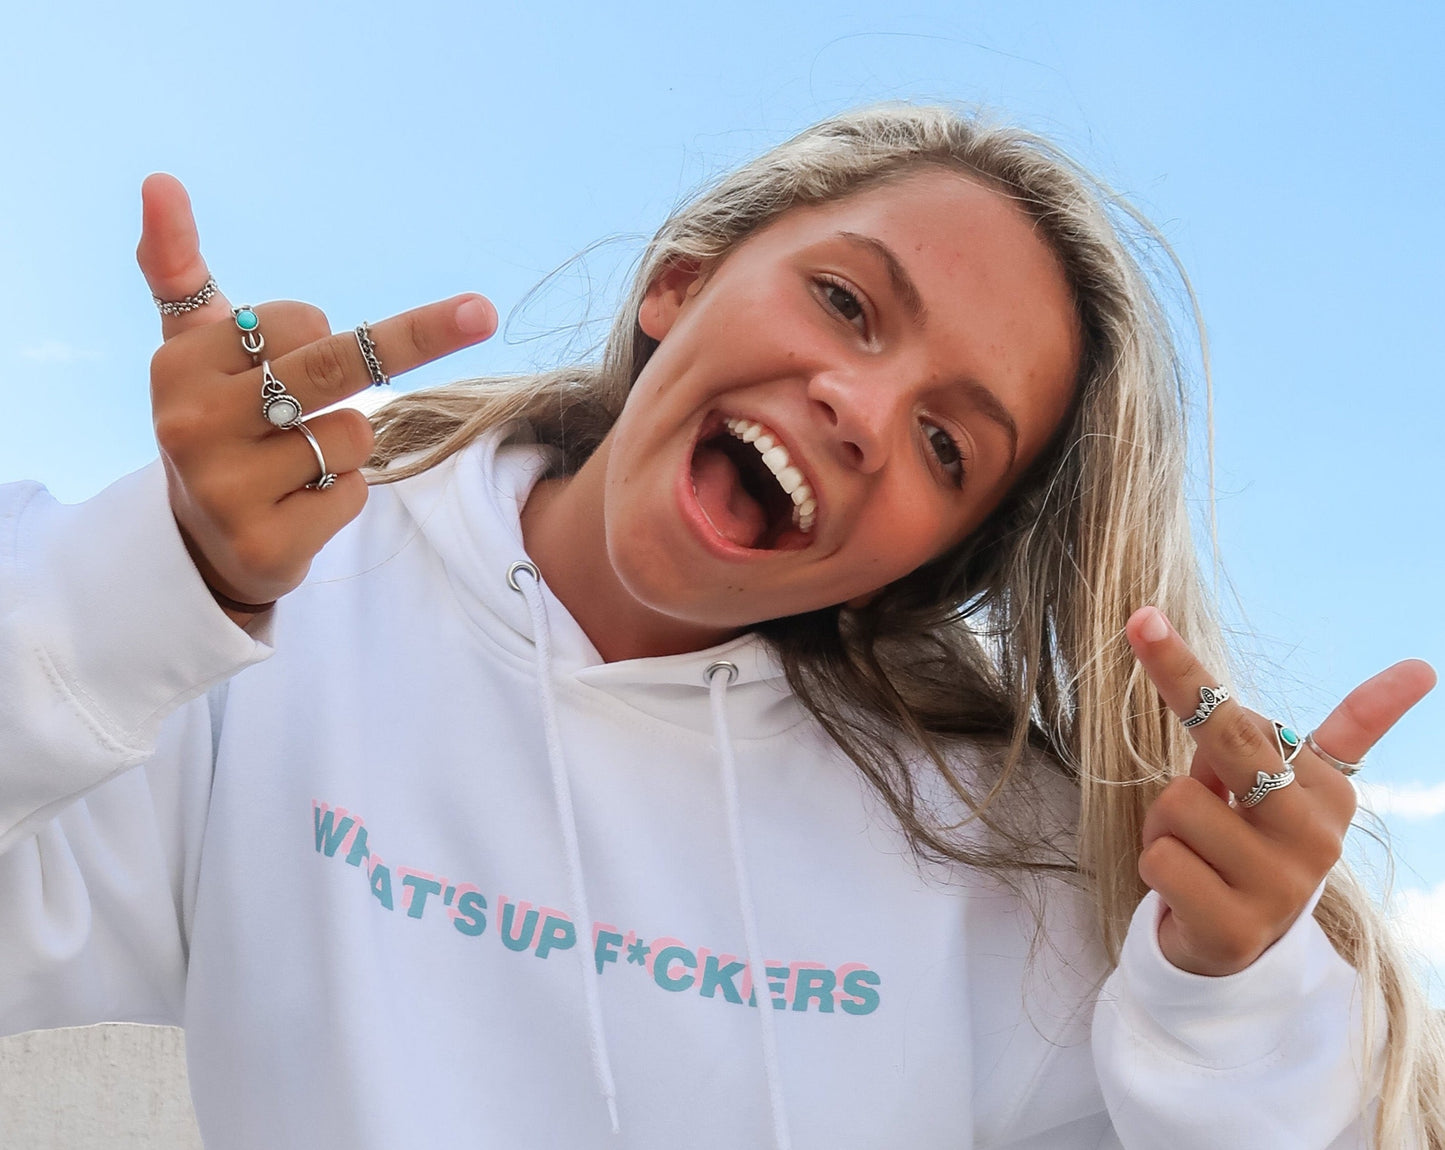 WHAT'S UP F*CKERS White Hoodie